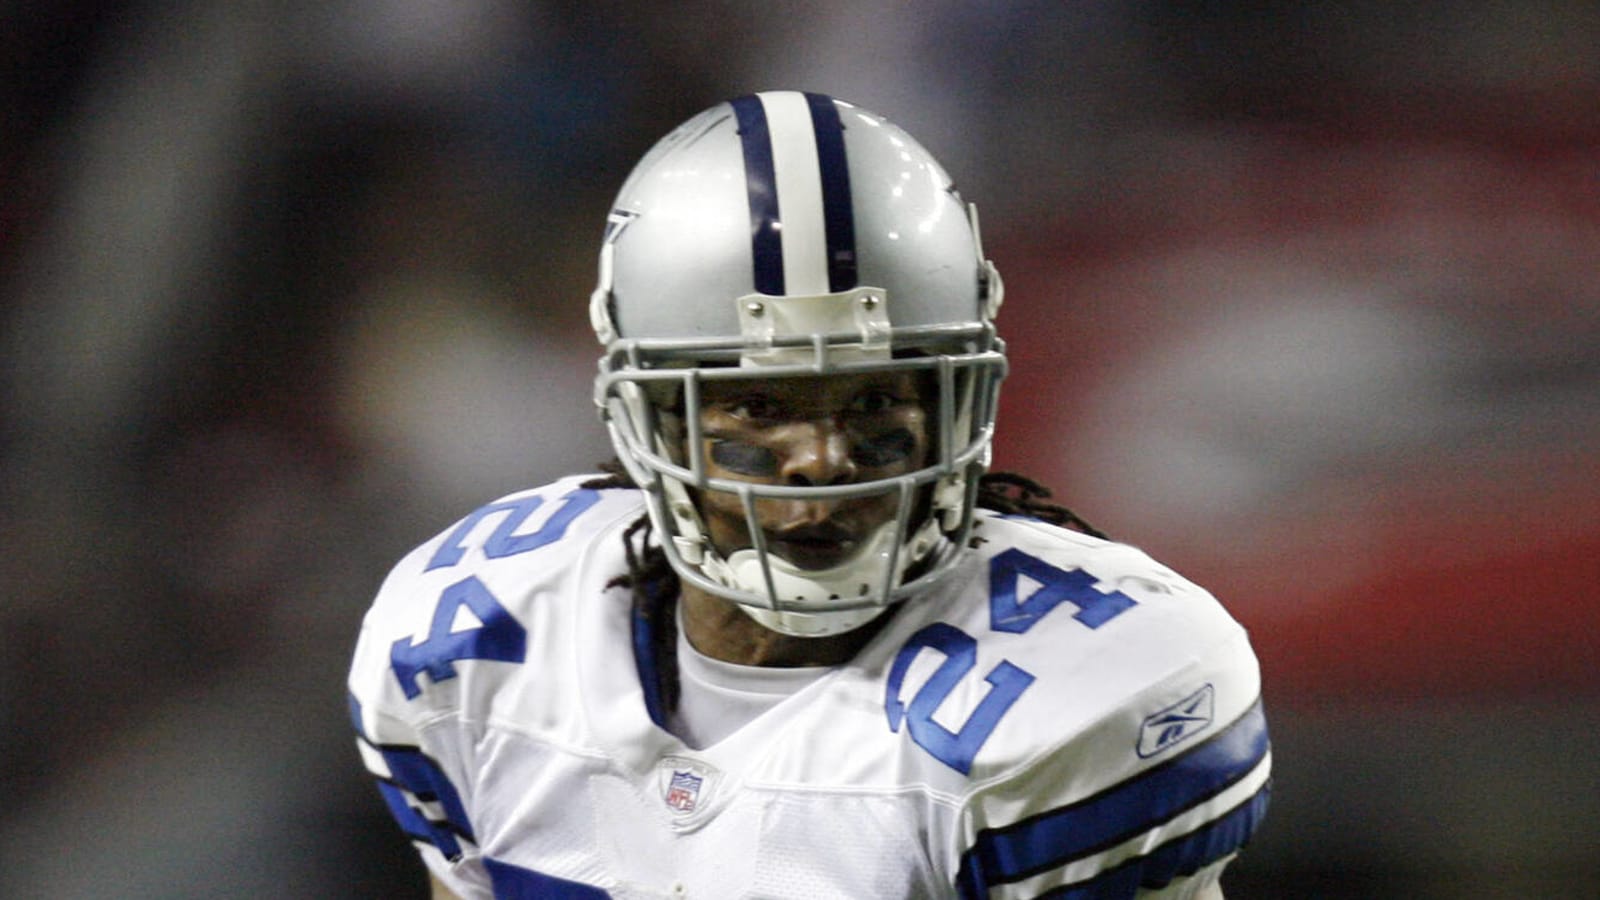 Former Cowboys, Bears RB Marion Barber III died from heat stroke